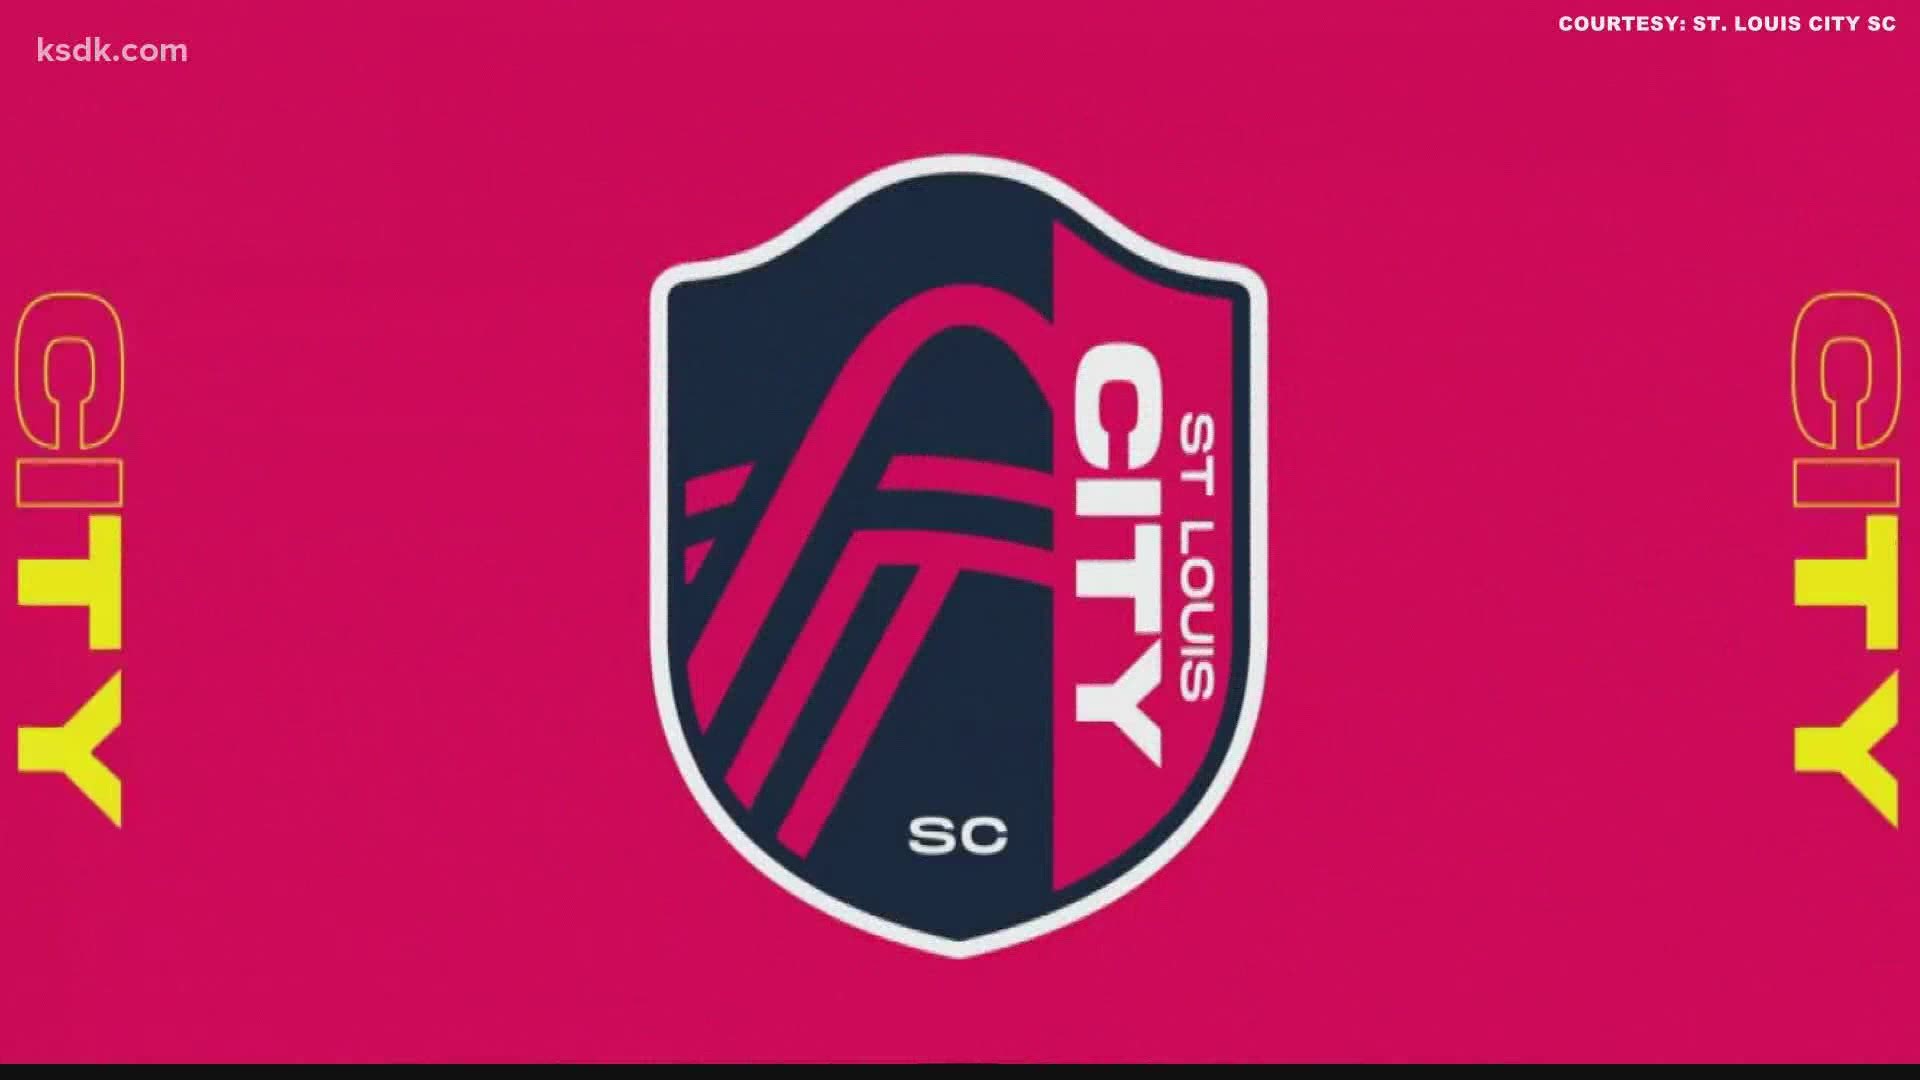 St. Louis City SC will come to St. Louis in 2023